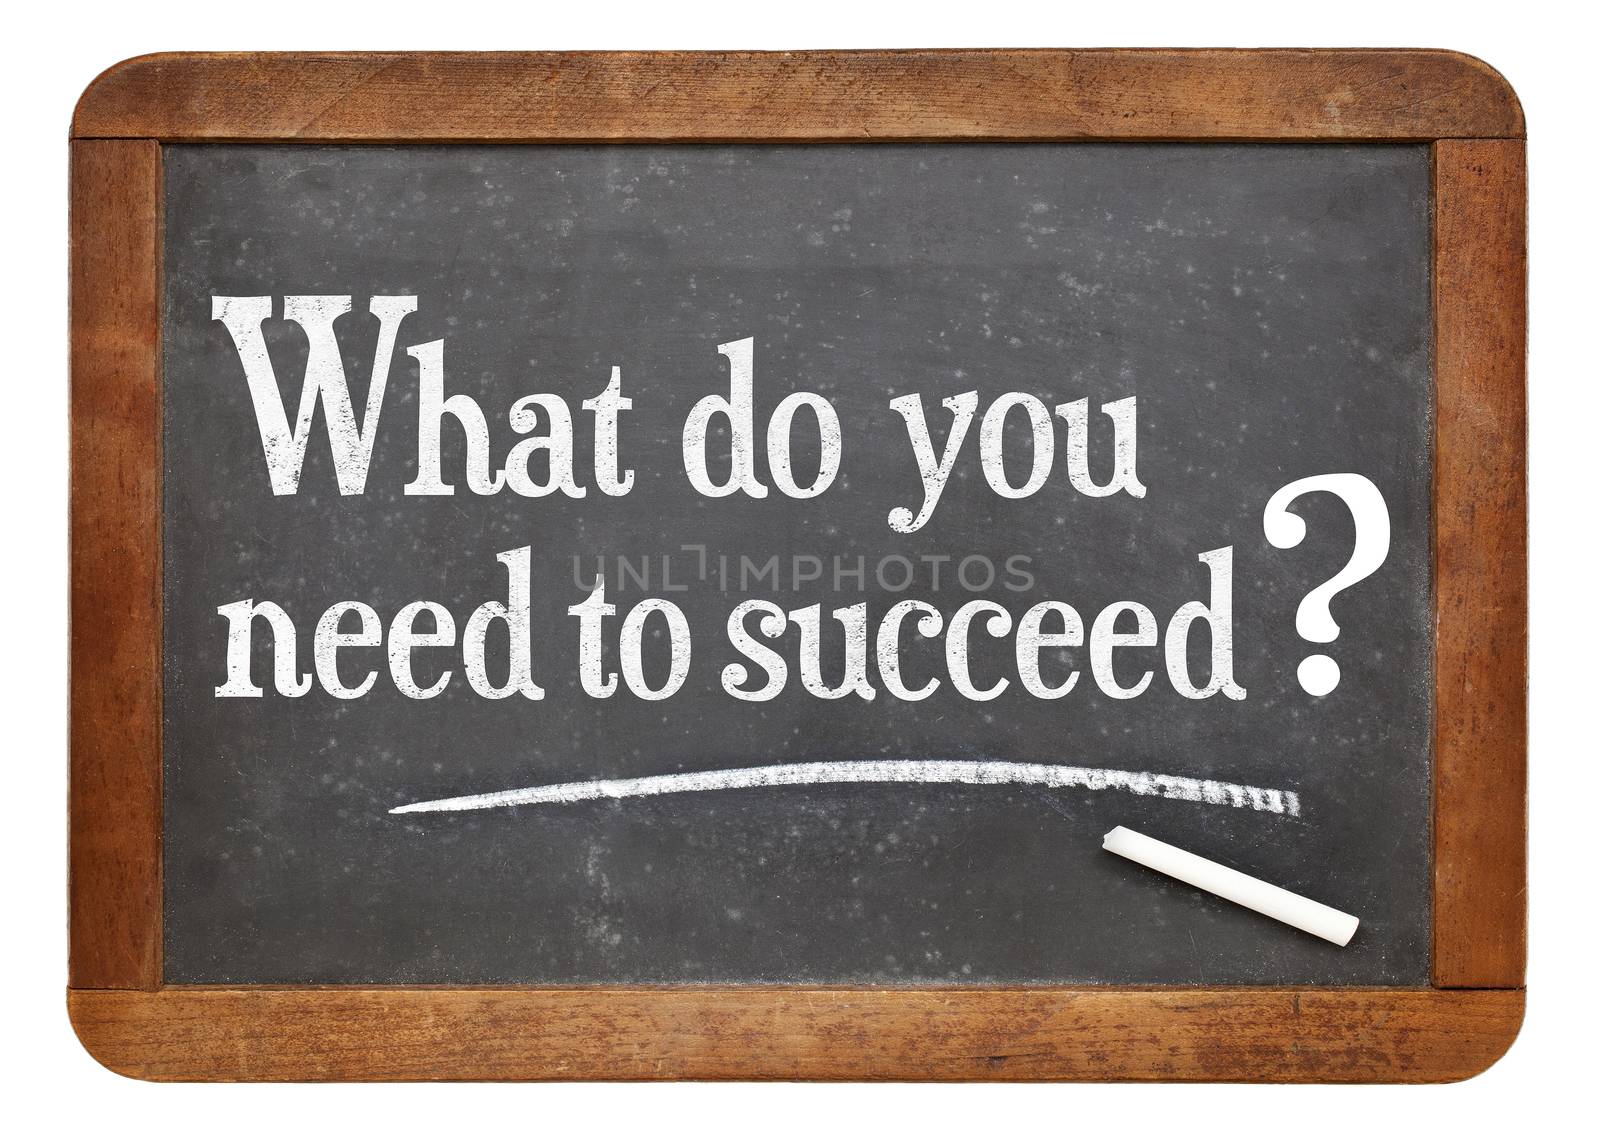 What do you need to succeed?  A question on a vintage slate blackboard, A success concept.